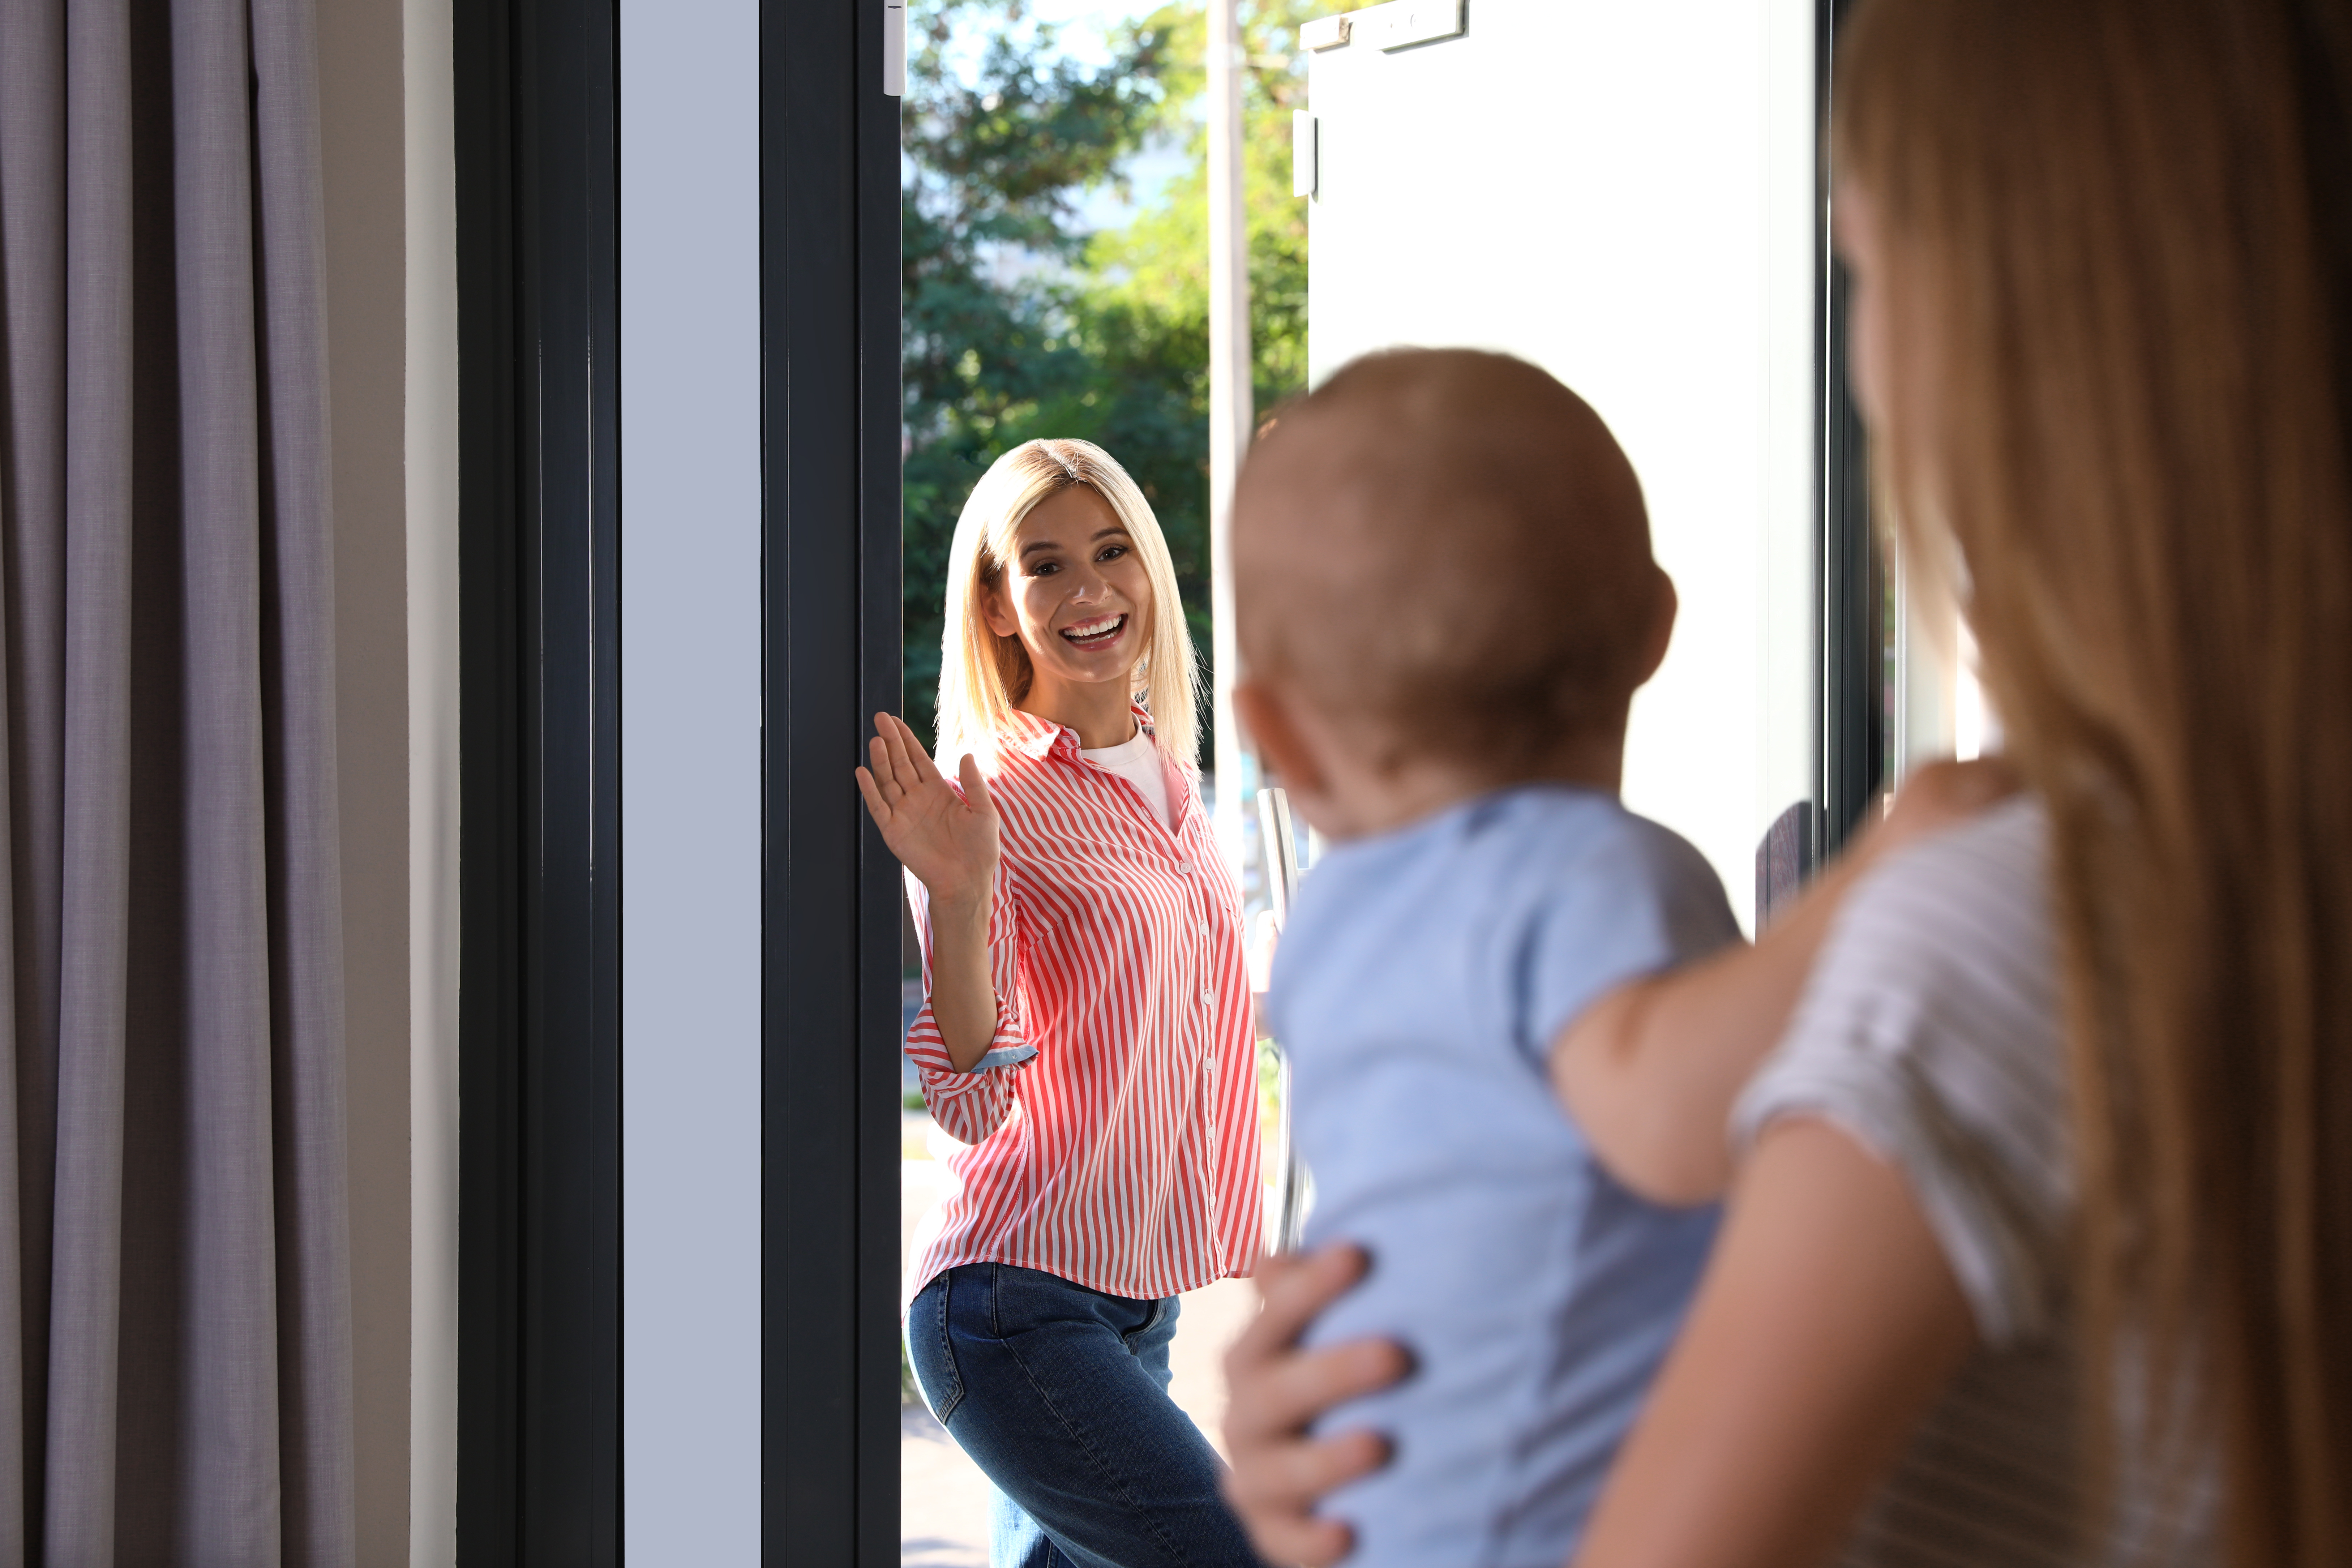 Mother leaving her baby with a teen nanny at home | Source: Shutterstock